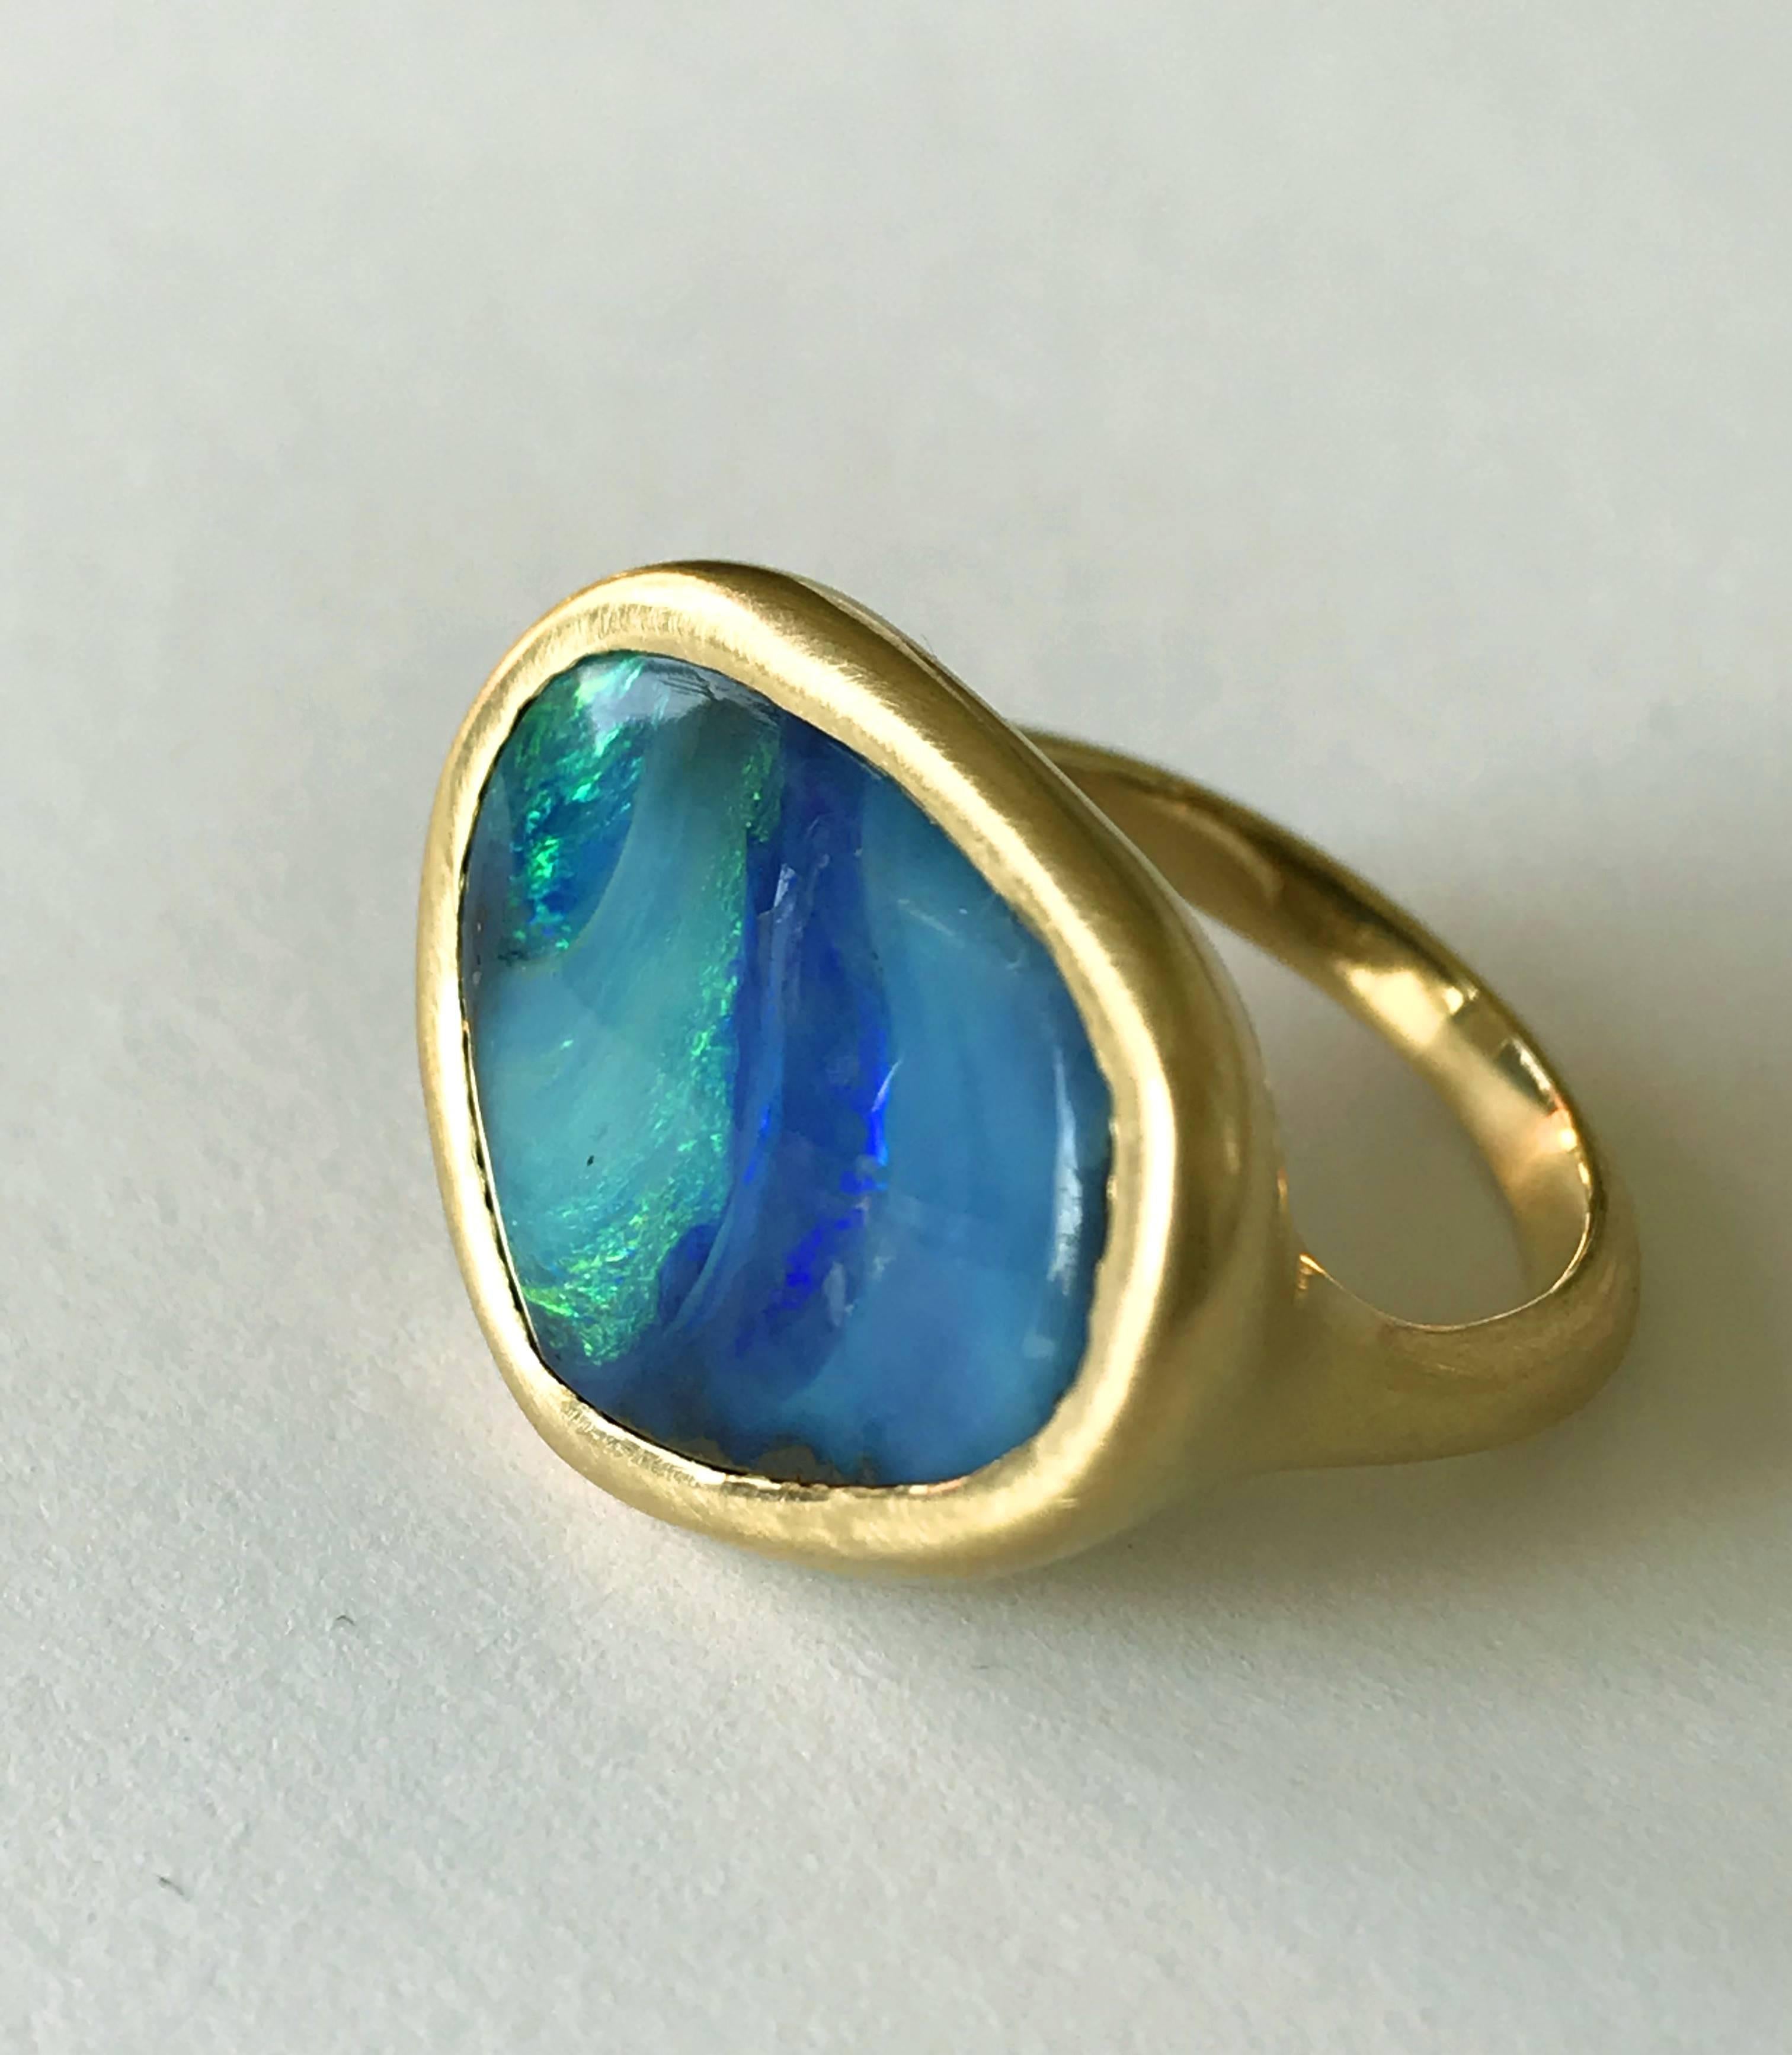 Dalben design One of a kind 18k yellow gold semi lucid finishing ring with a 9,6 carat bezel-set lovely Blue-green Australian Boulder Opal .  
This Australian Boulder Opal has the seabed colors 
Ring size 6 3/4 - EU 54 re-sizable to most finger